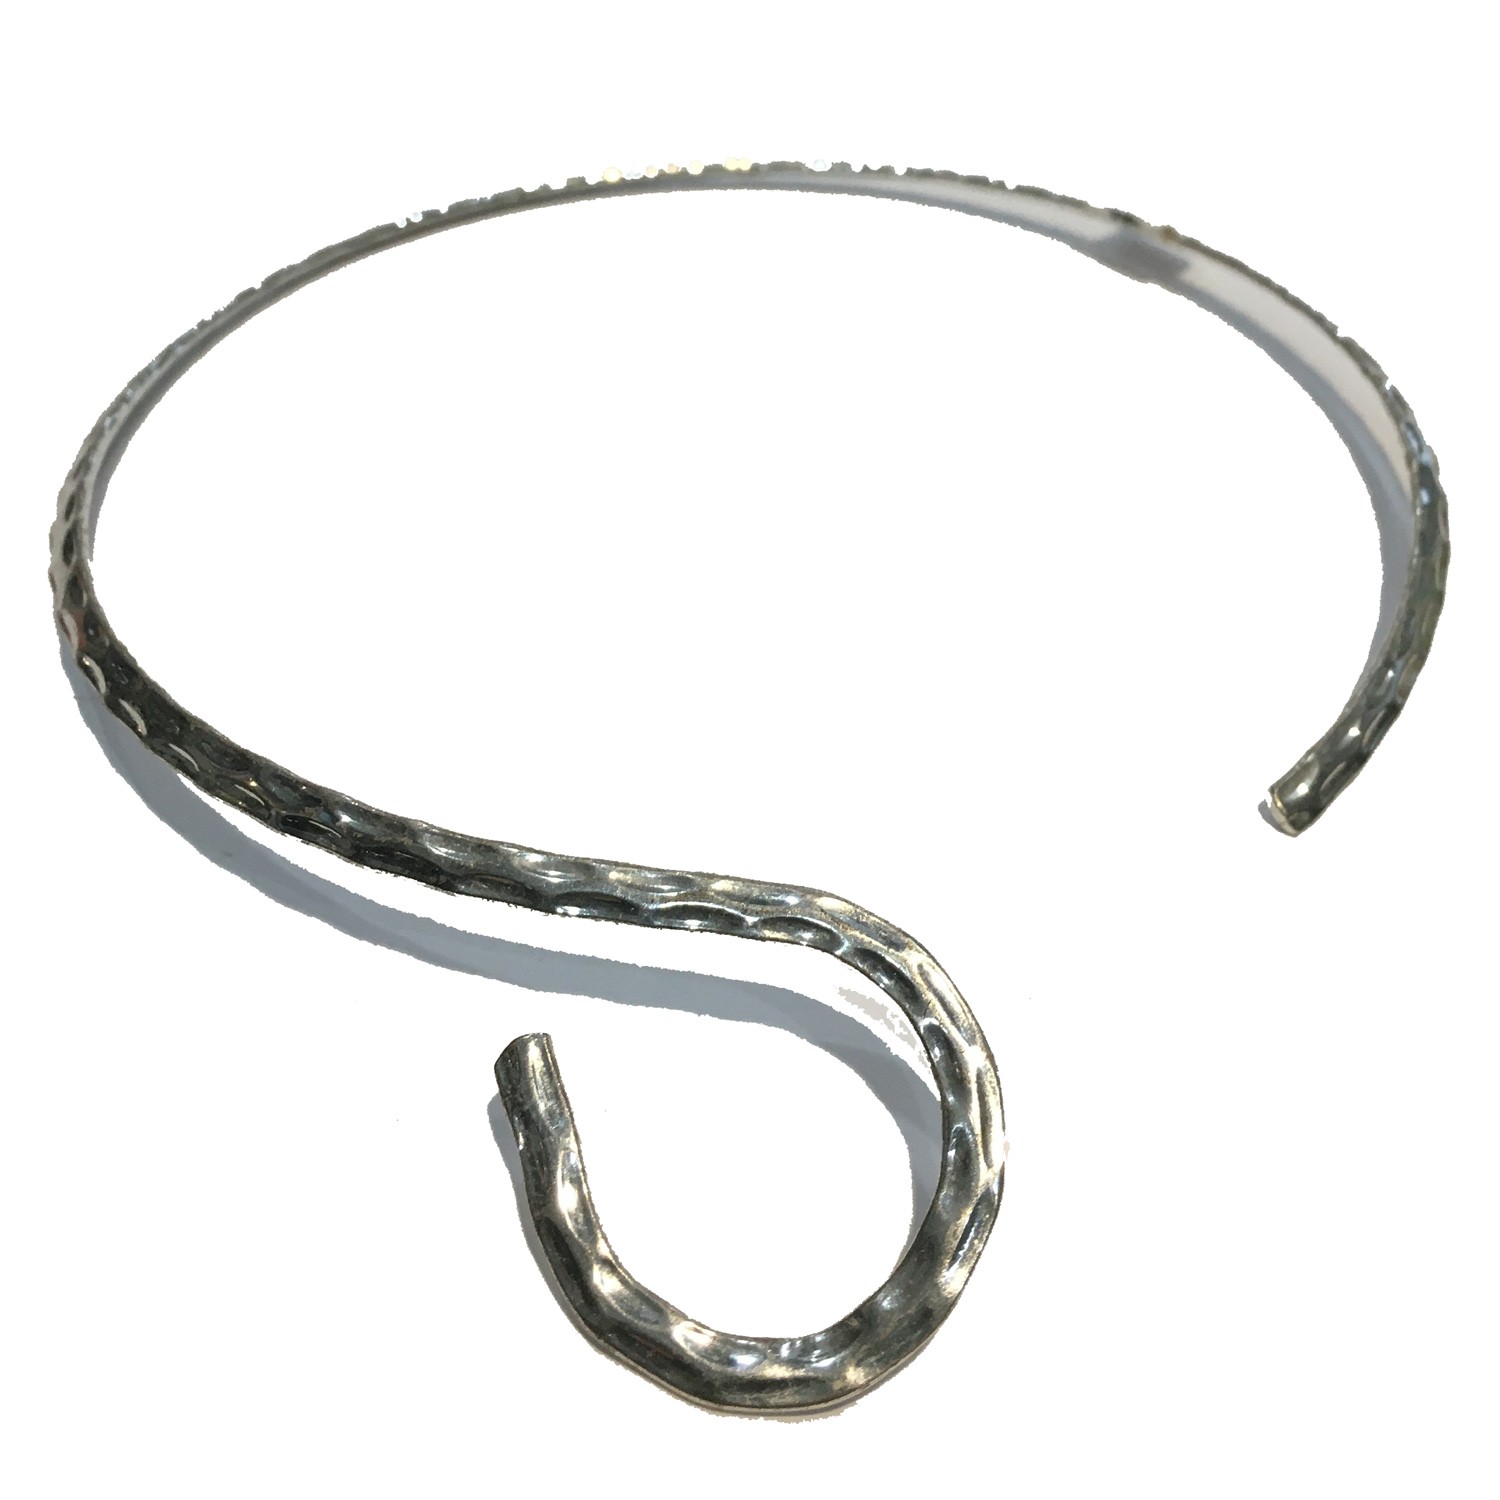 SLIDE CHOKER QUESTION MARK STYLE HAMMERED RHODIUM PLATED  15